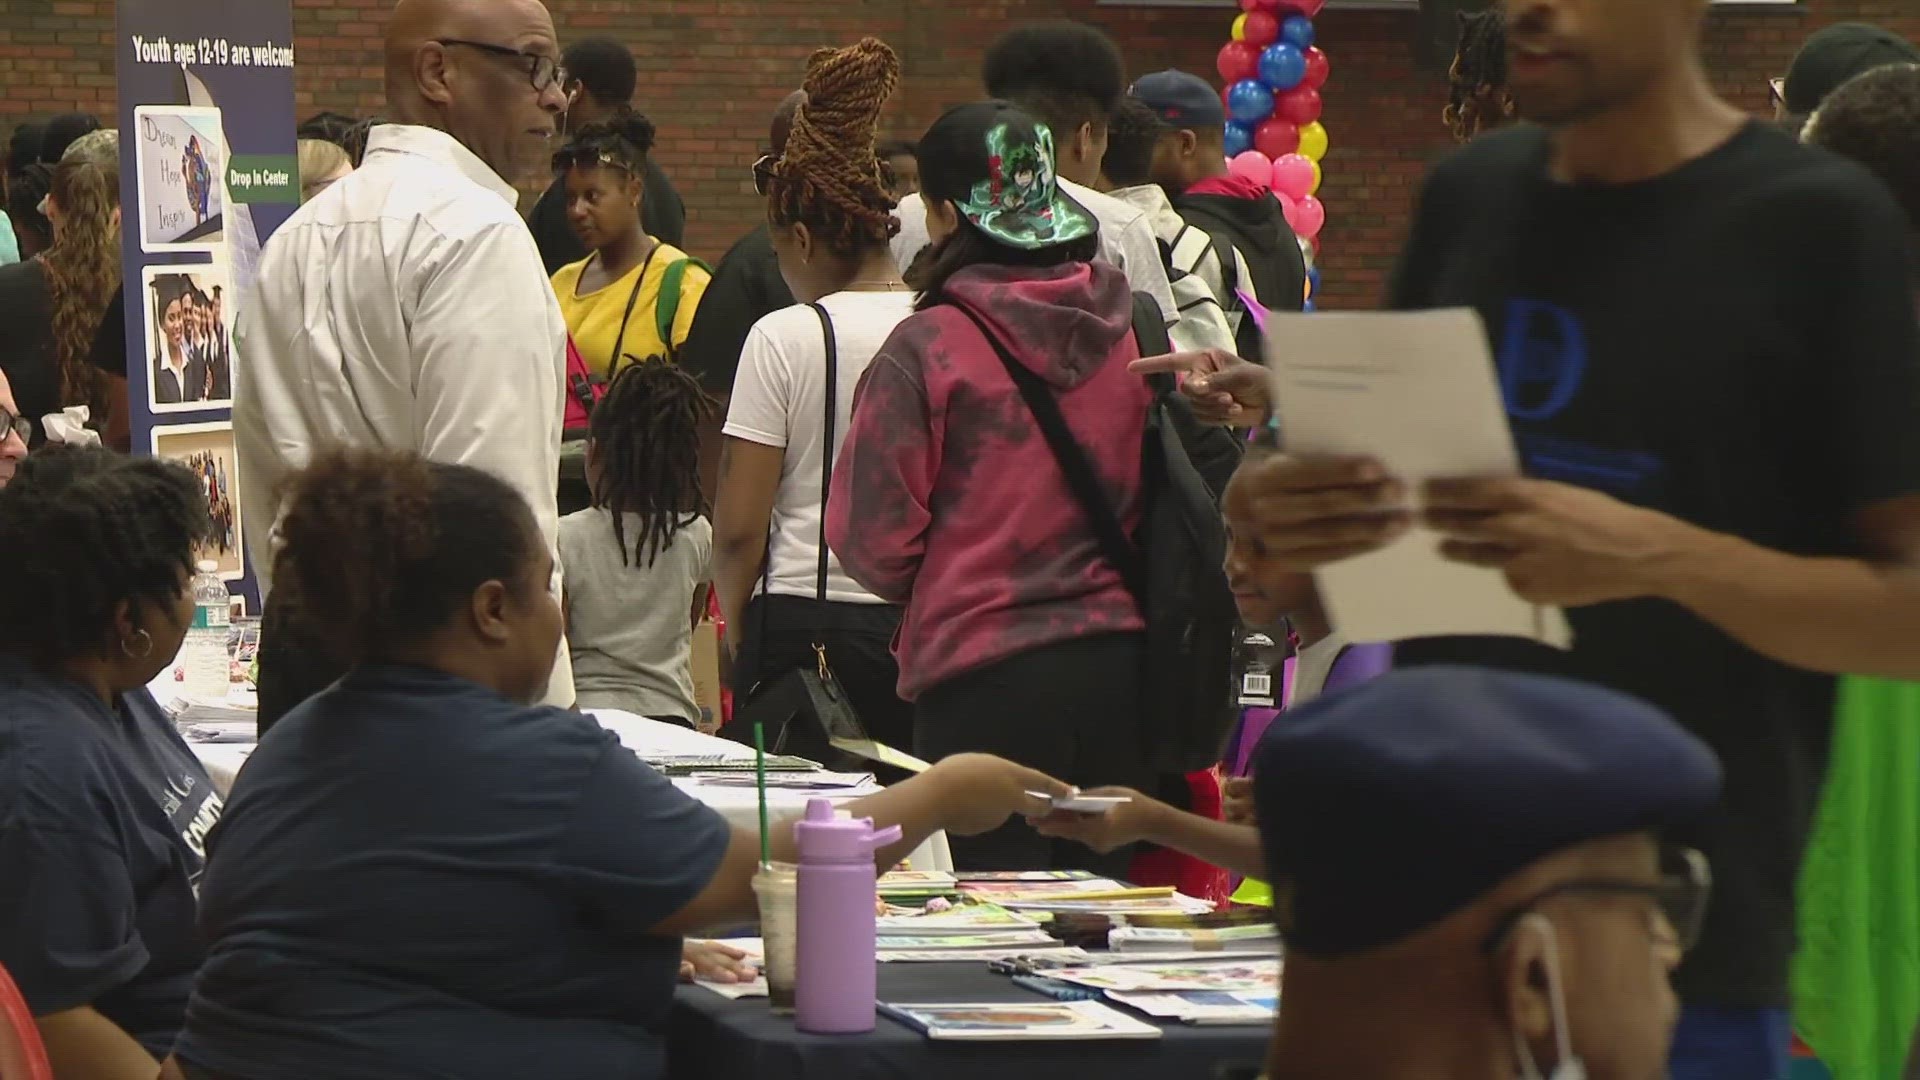 The Back to School Bash had a goal of helping 700 students prepare for heading back to classrooms. Everything from school supplies to hair cuts was offered.